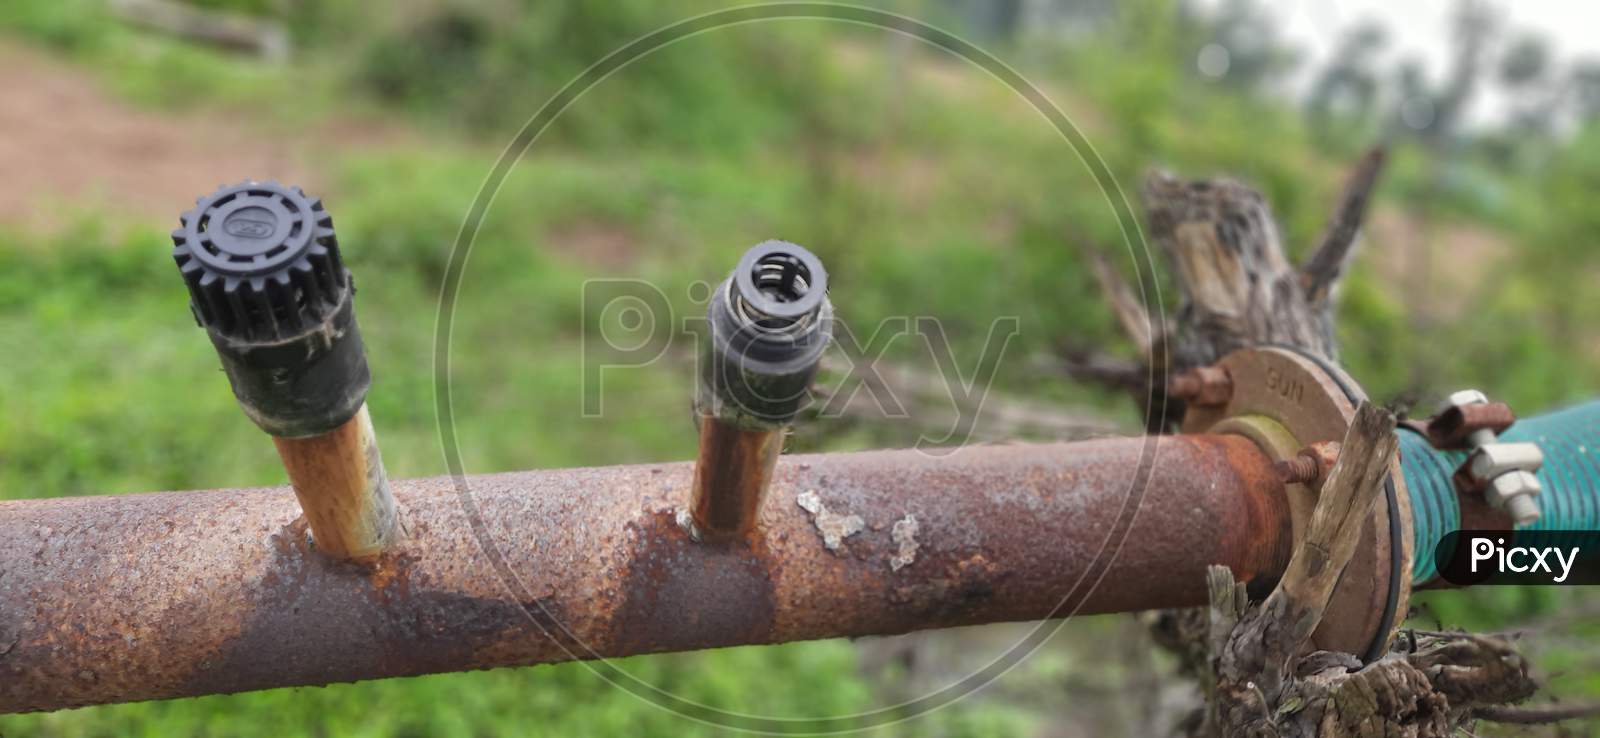 old rusted motor pump connect to plastic pipe with air valves